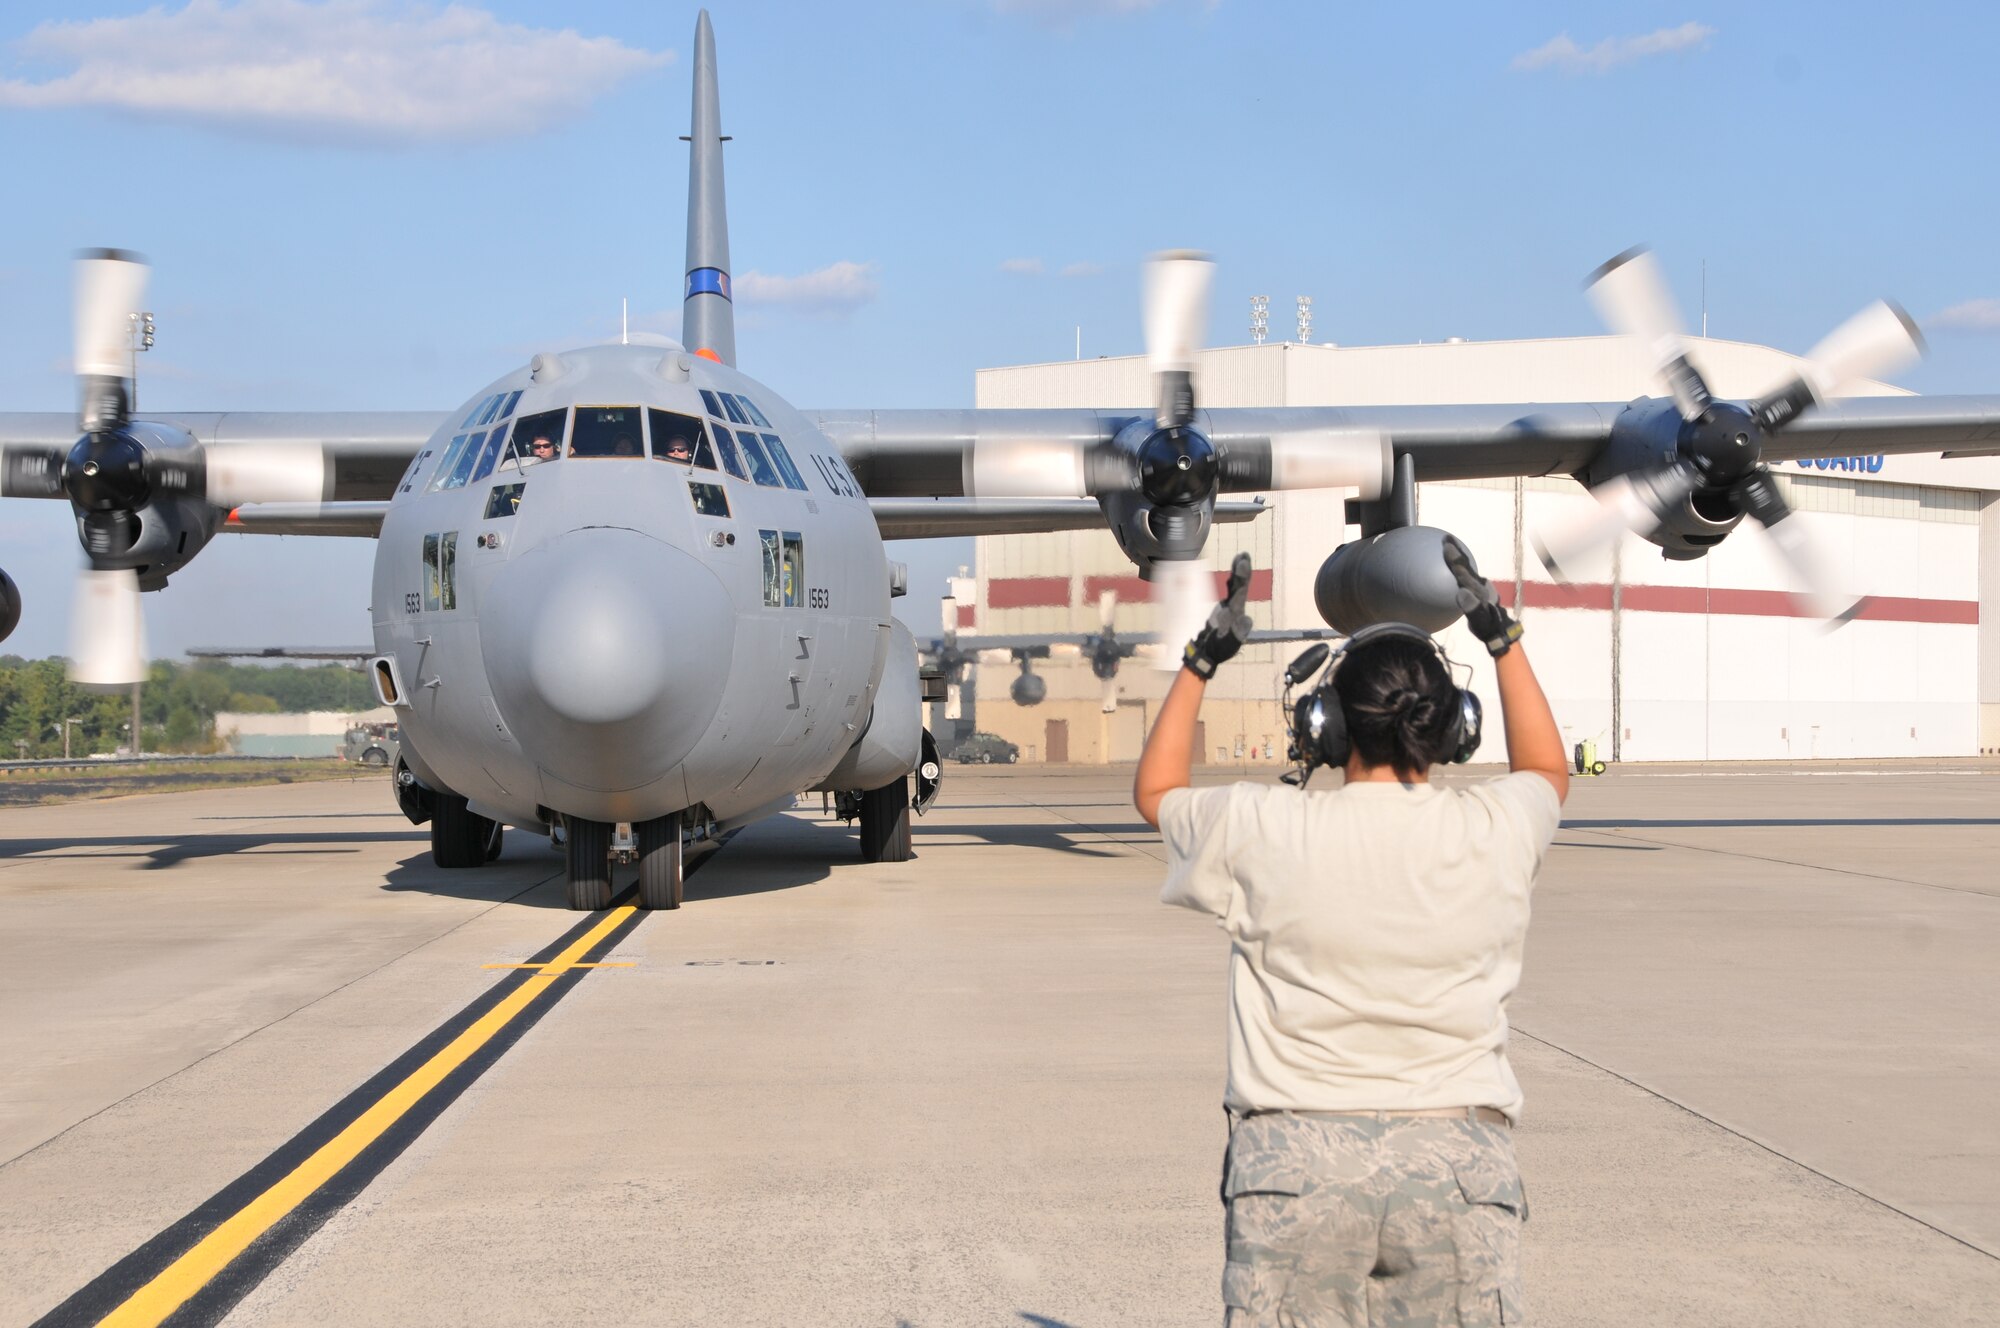 U.S. Air Force Master Sgt. Megan Delgado-Wahl, crew chief for the 145th Aircraft Maintenance Squadron, marshals aircrew onboard a 145th Airlift Wing, C-130 Hercules aircraft as it taxies out to runway at the North Carolina Air National Guard Base, Charlotte Douglas International Airport, Sept. 9, 2013. (U.S. Air National Guard photo by Master Sgt. Richard Kerner, 145th Public Affairs/Released)